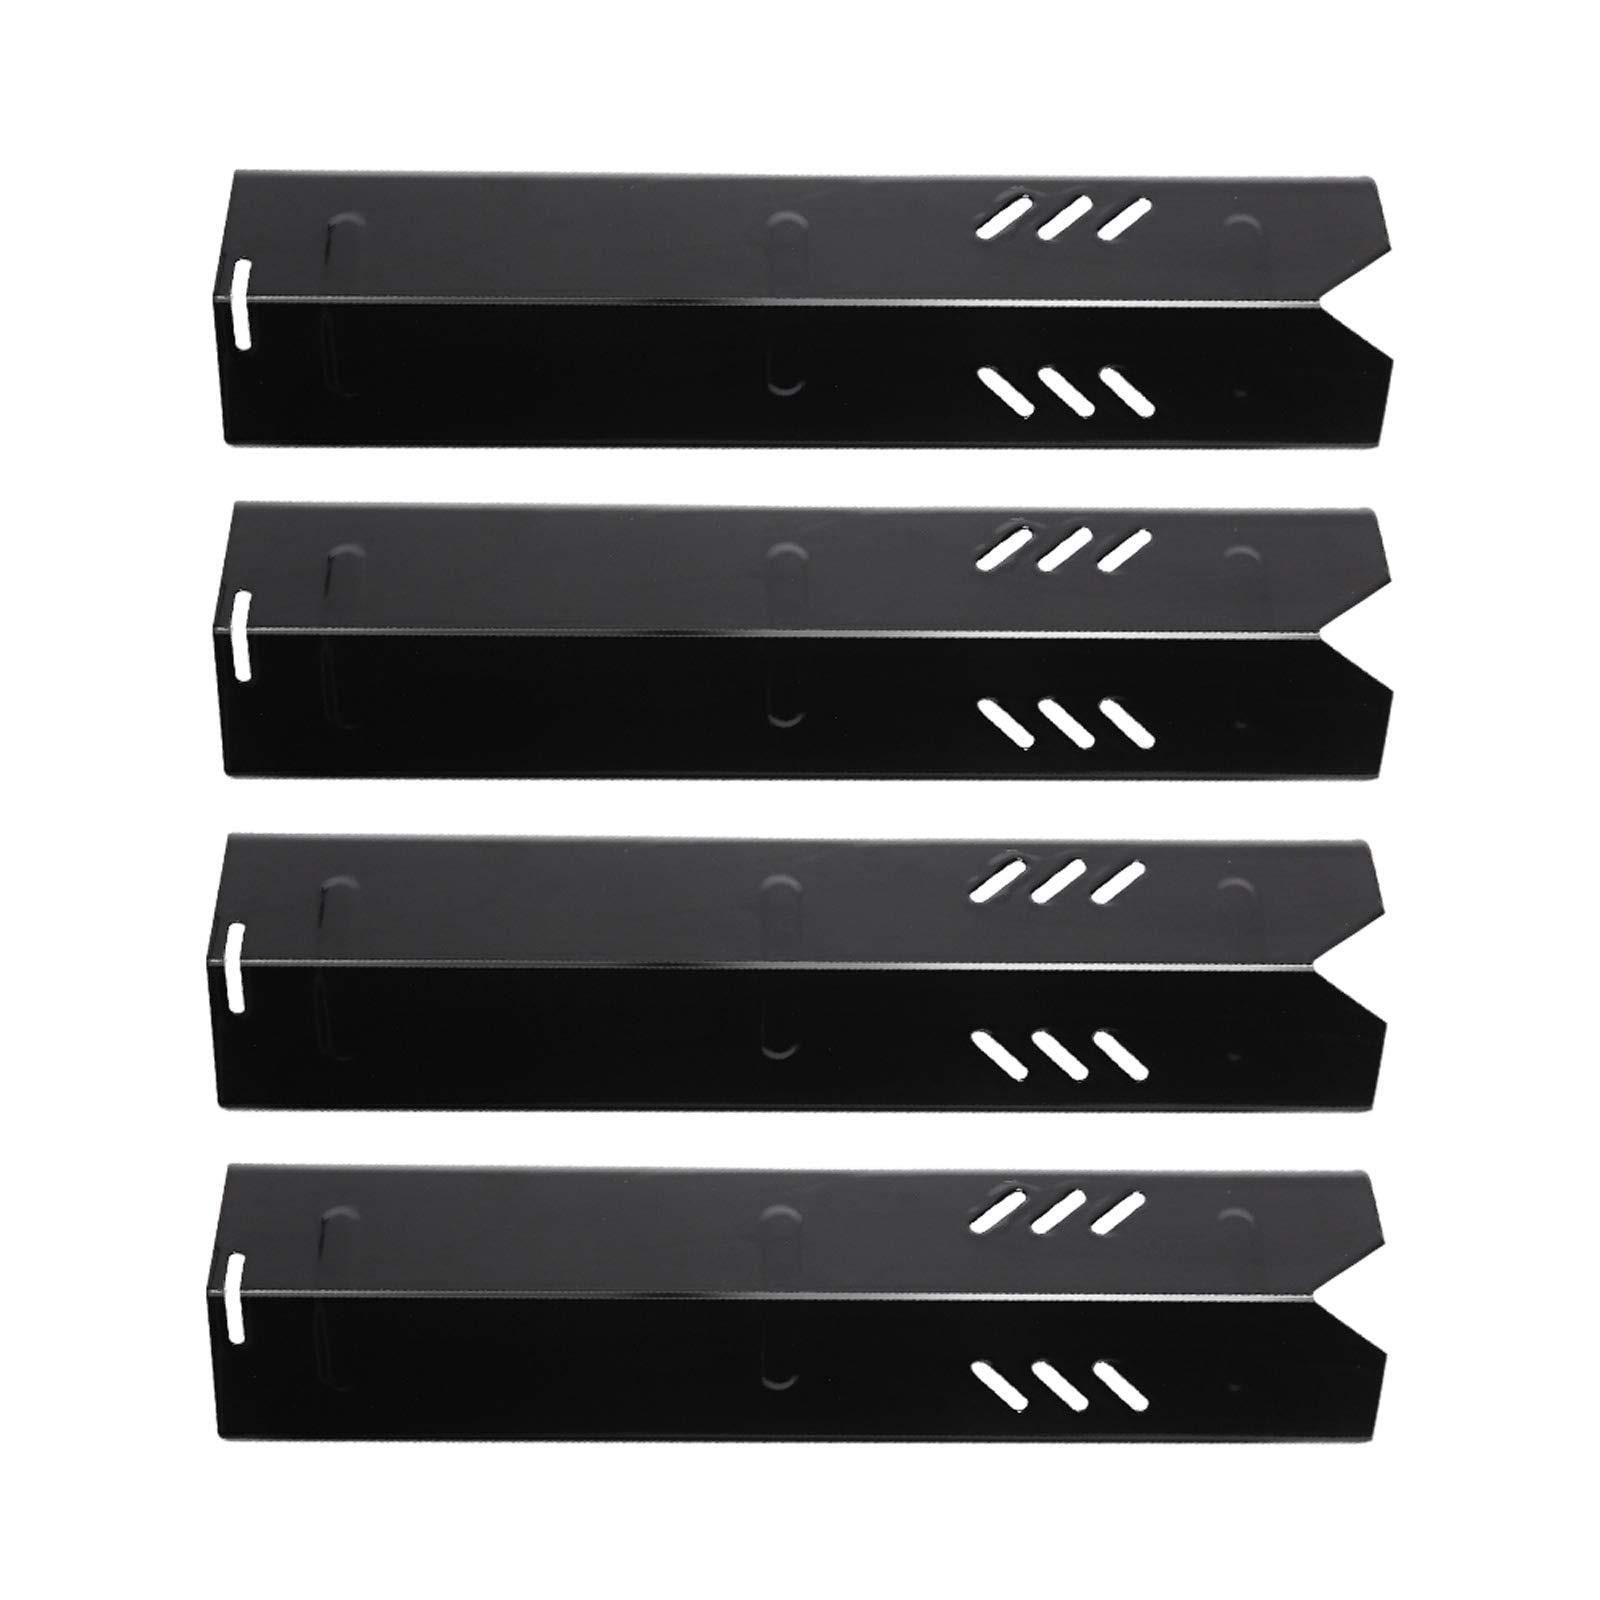 4 Pack Porcelain Heat Shield Plates Bbq Gas Grill Parts Burner Cover Flame Tamer